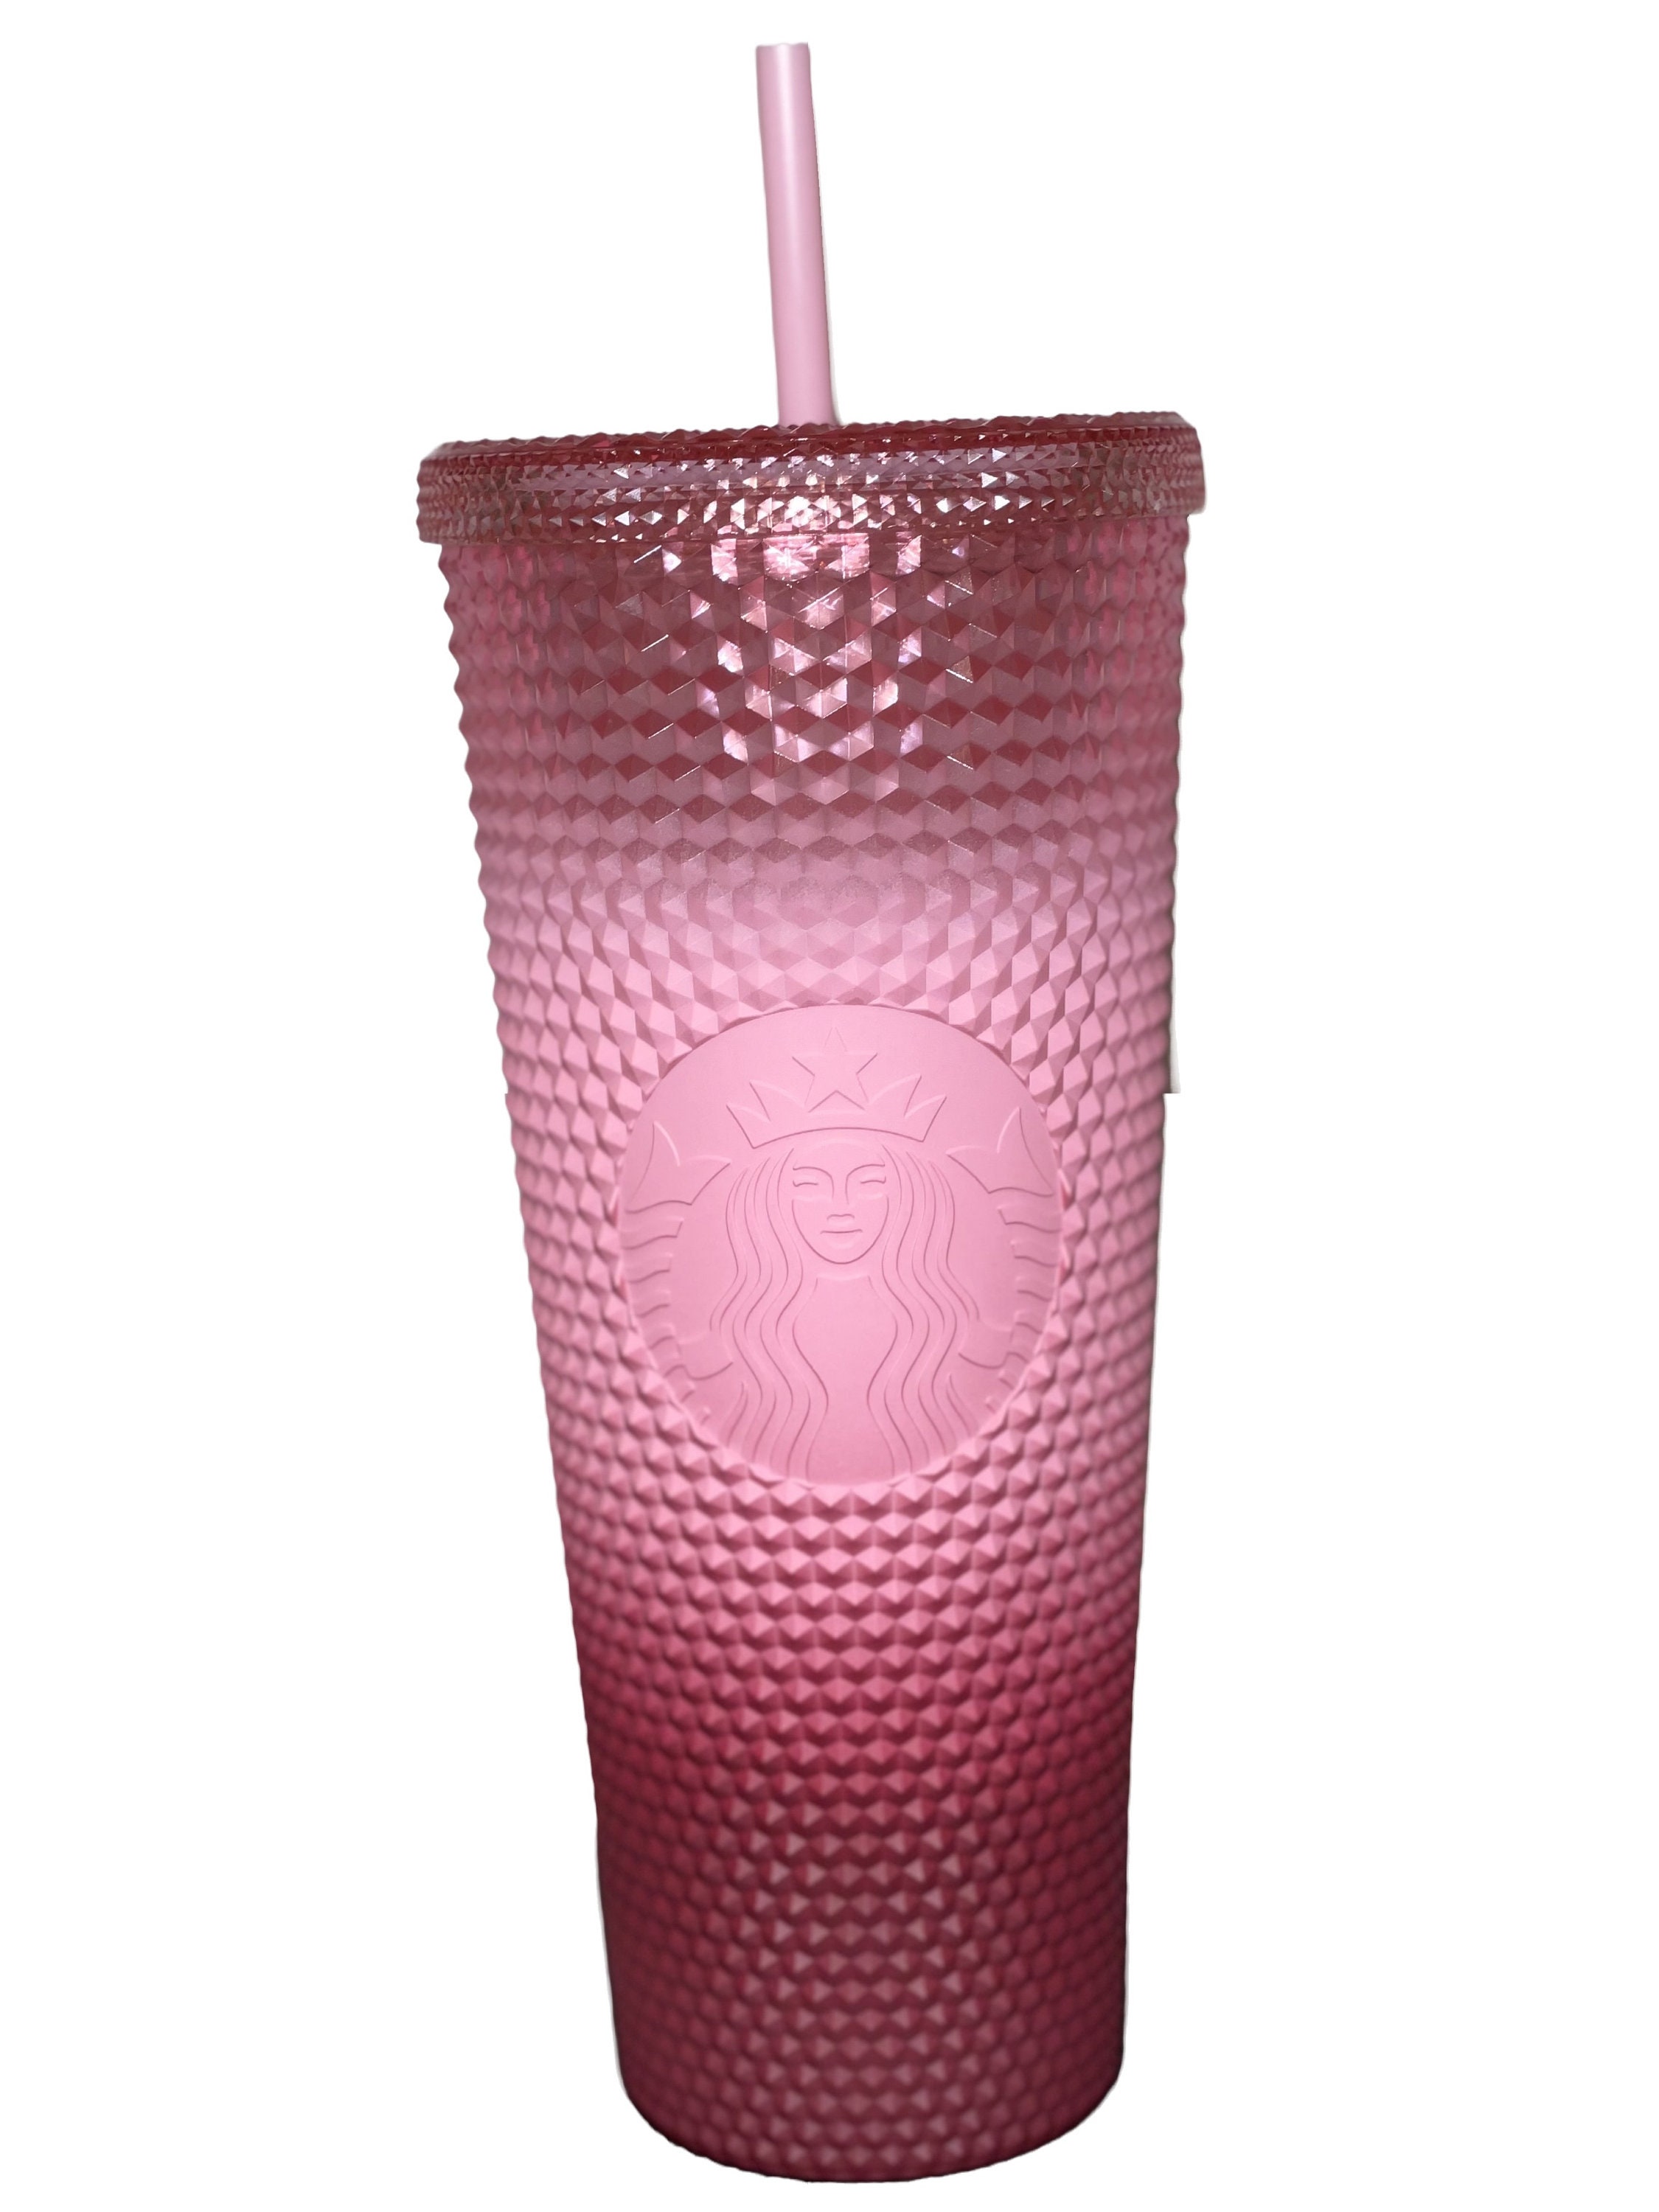 Starbucks Tumbler 2022 Venti Sangria Berry Hot Pink Fuchsia Studded Holiday  Cup